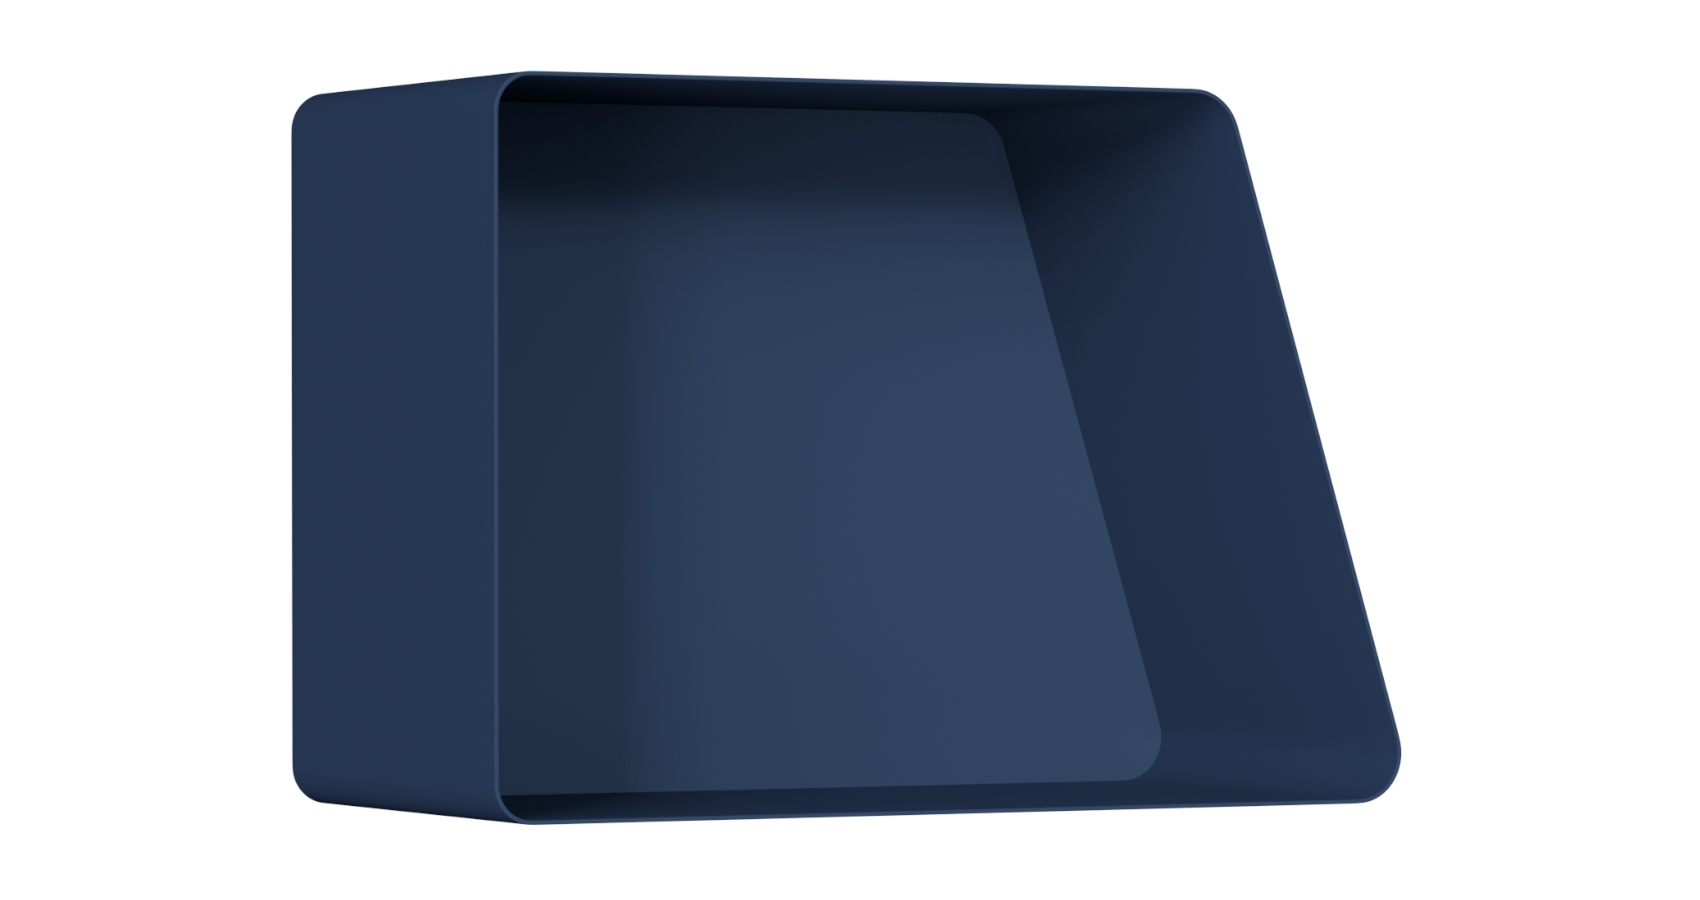 Pixa Wall Mounted closed shelf in navy in front view